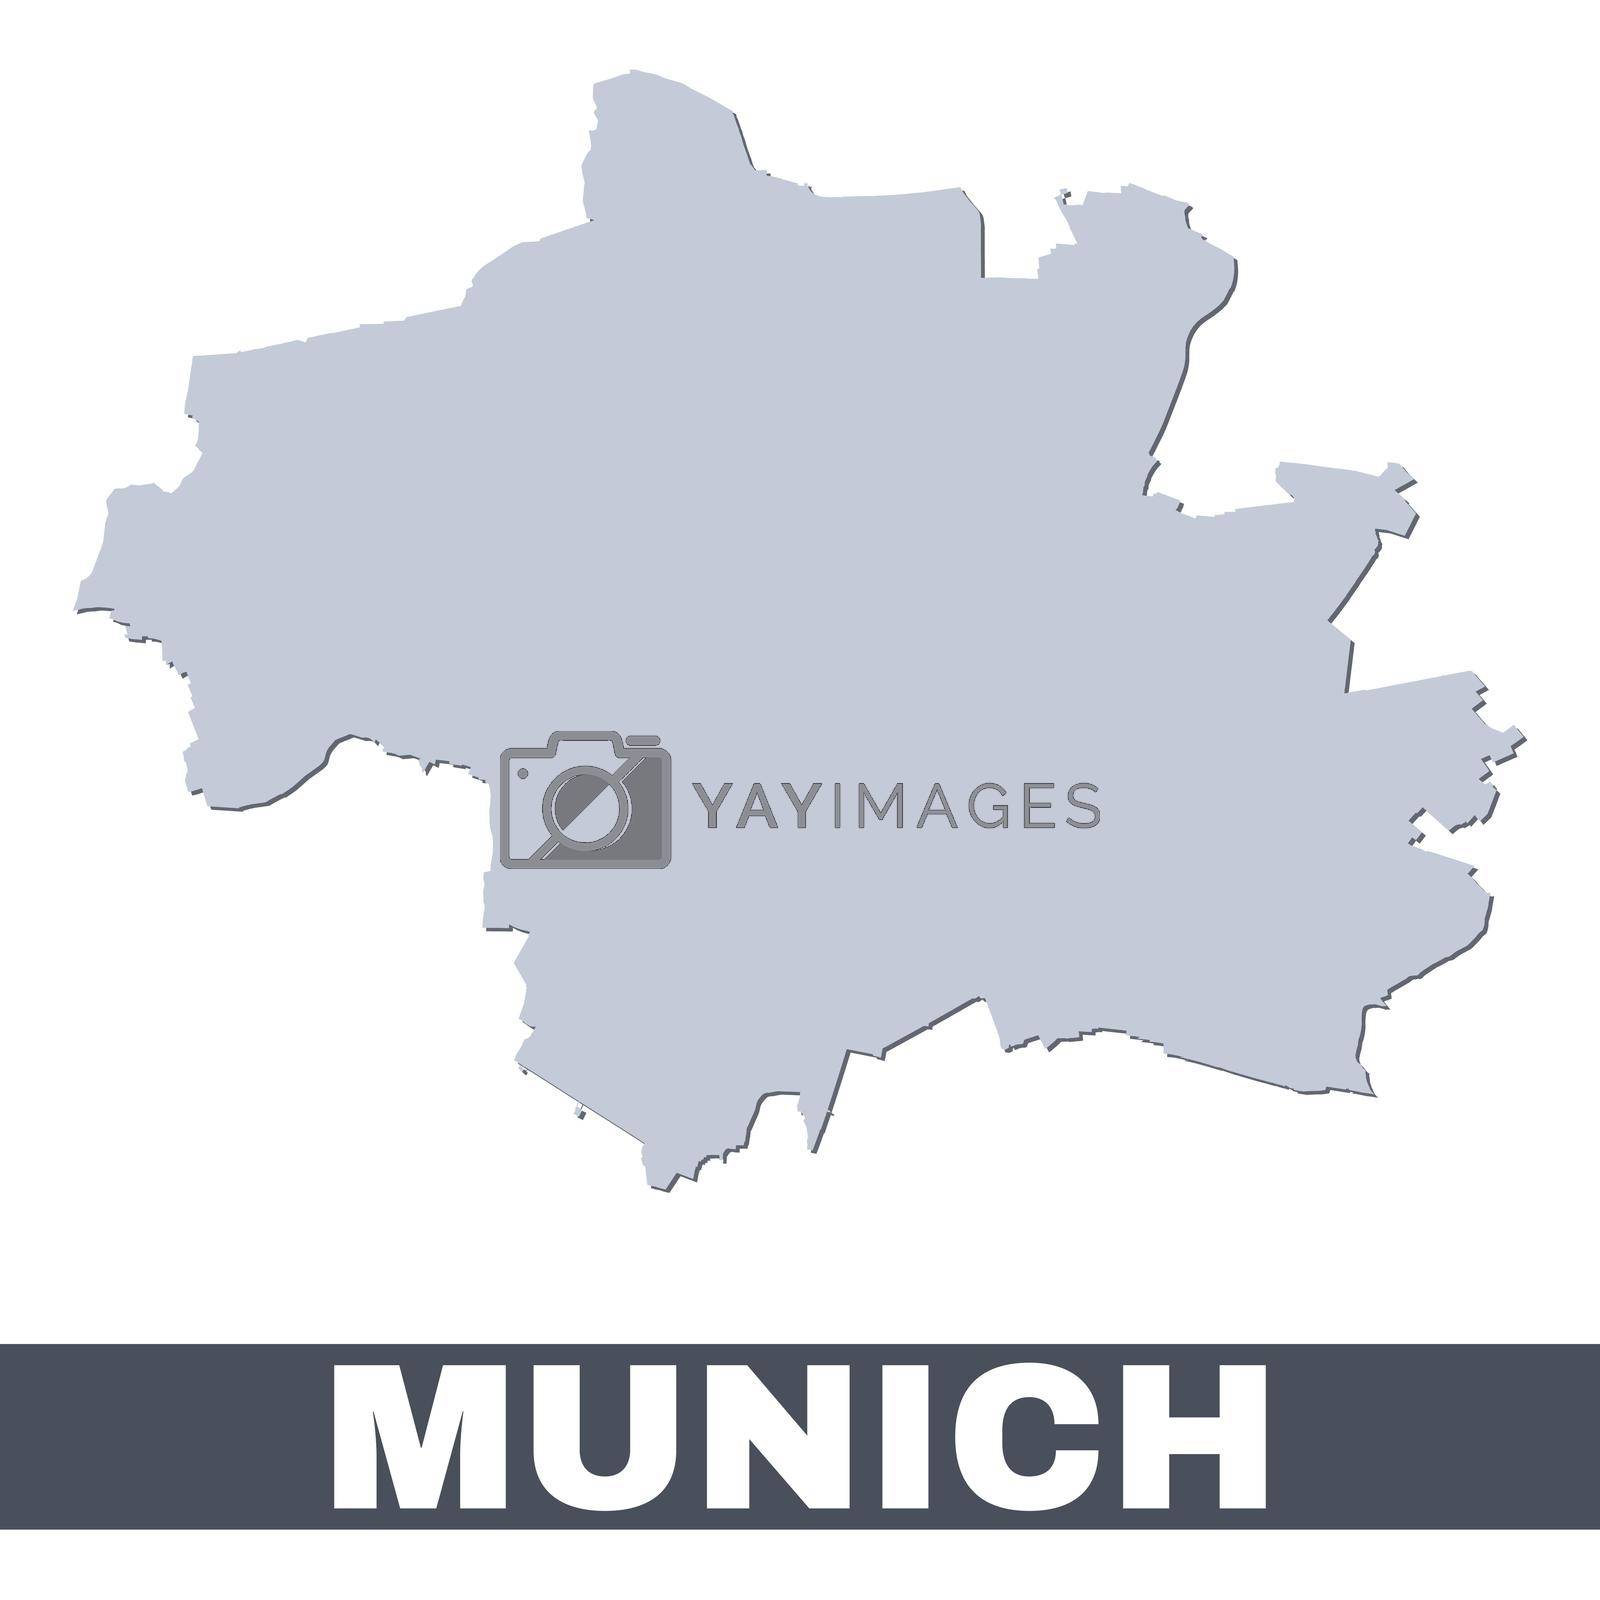 Royalty free image of Munich outline map. Vector map of Munich city area borders with shadow by Litteralis